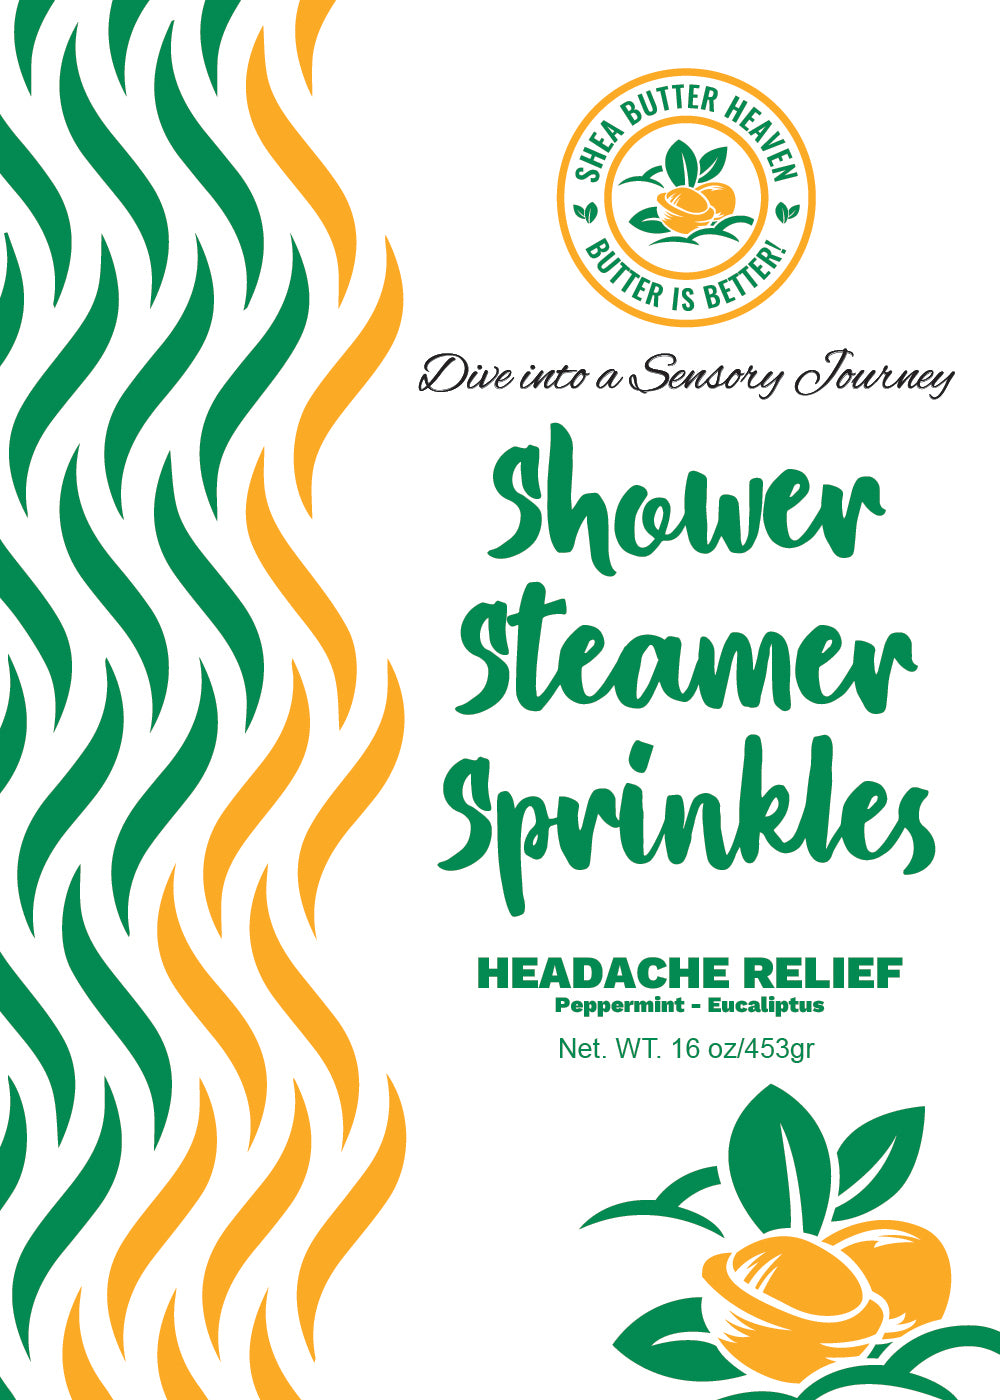 Headache Relief: Our shower sprinkles are expertly blended with crisp peppermint and cooling eucalyptus essential oils, known for their headache-relief properties. Step into your shower and let the soothing aroma alleviate tension and migraines, providing instant relief.